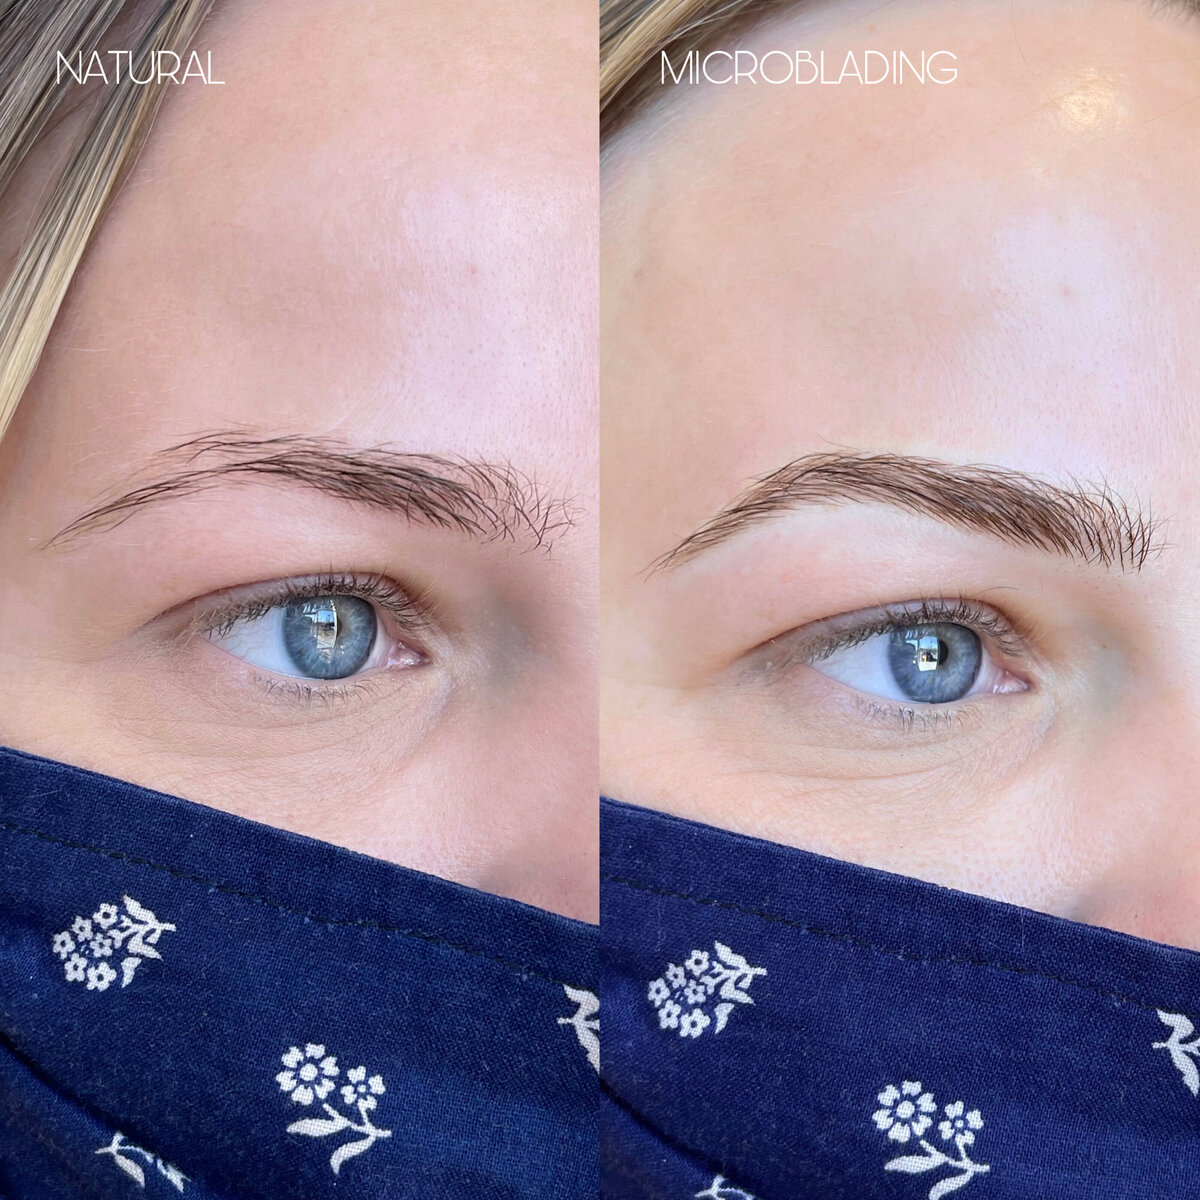 Natural Microblading done at Haven Beauty in Minneapolis, Minnesota